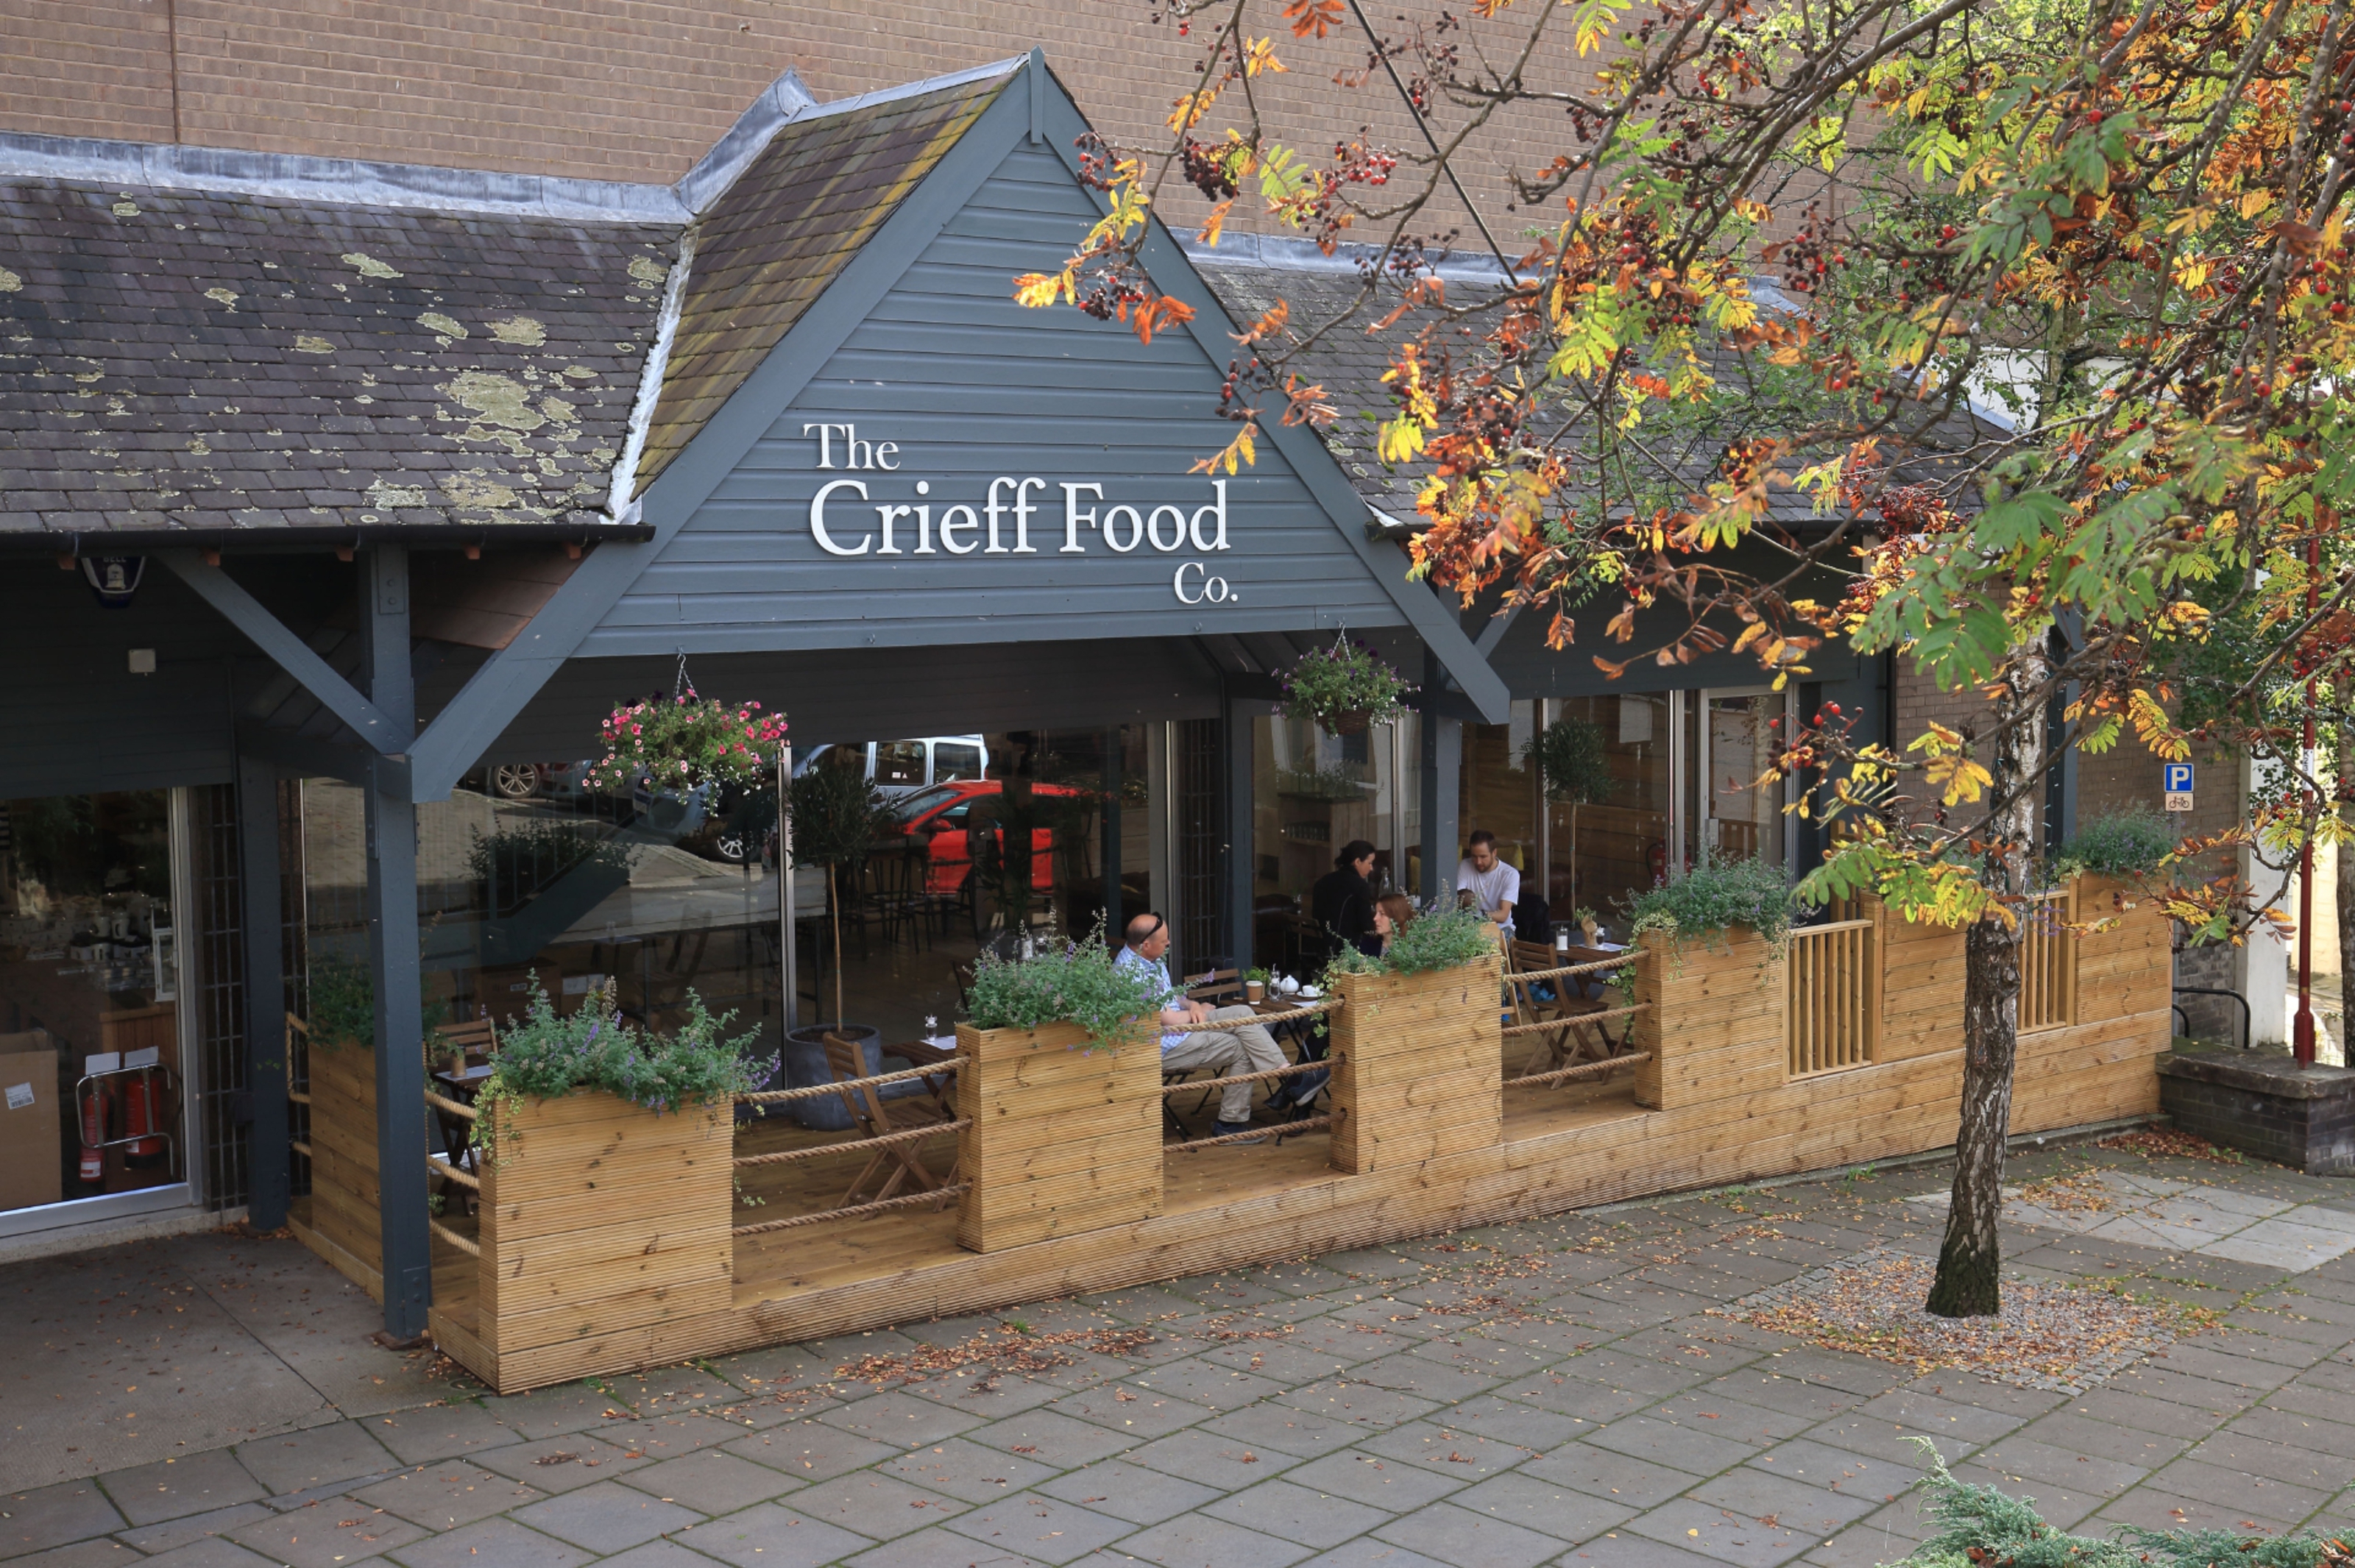 Crieff Food Co is being put up for sale. Image: Crieff Food Co.